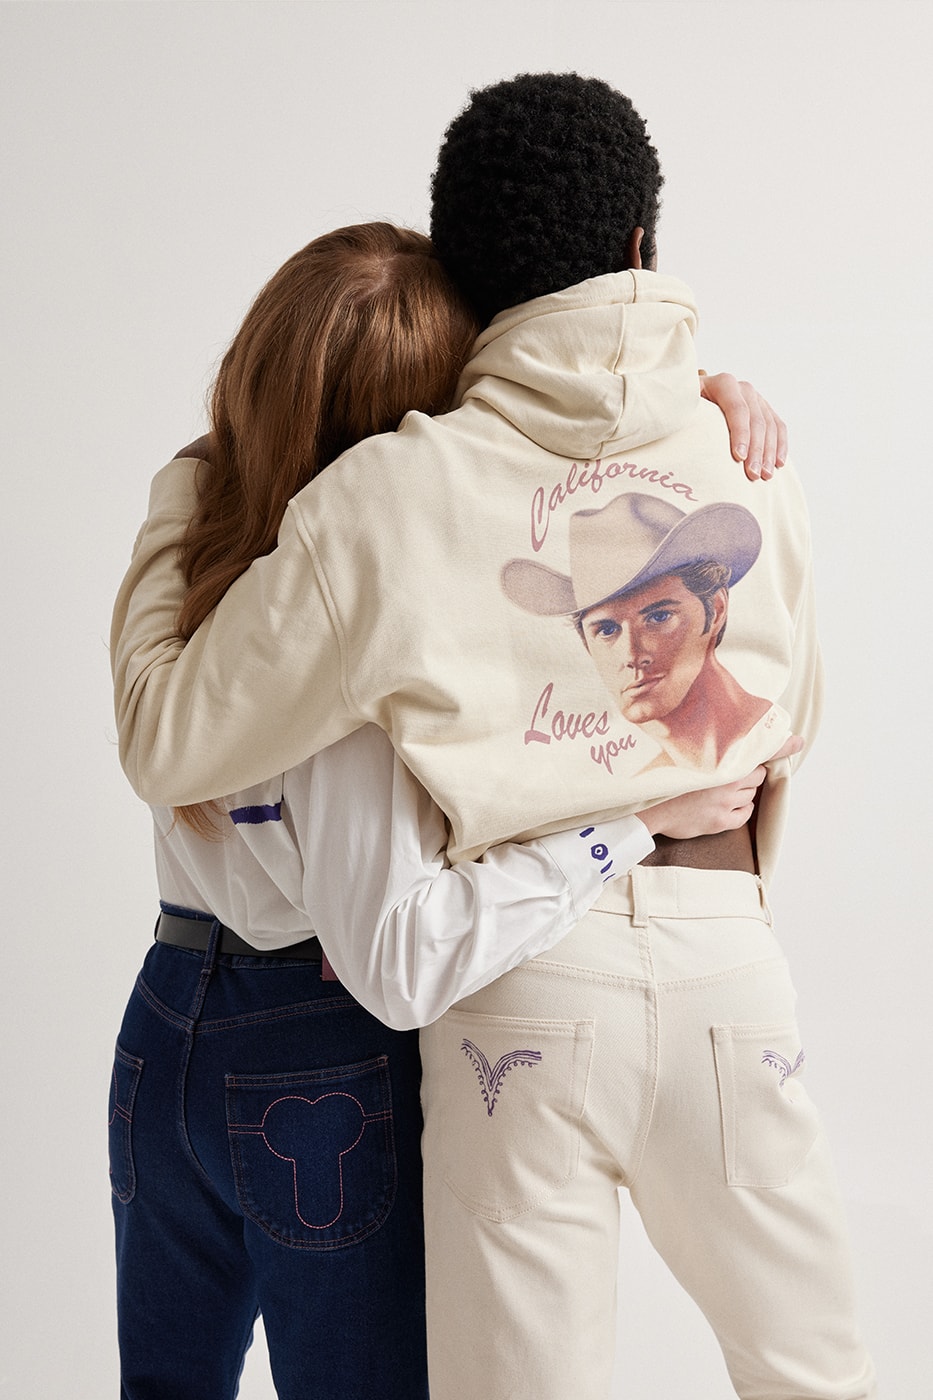 Tom of Finland Comes Together With Carne Bollente for Second Intimate Capsule Collection collaboration second capsule sex lgbtq gay sex positivy 